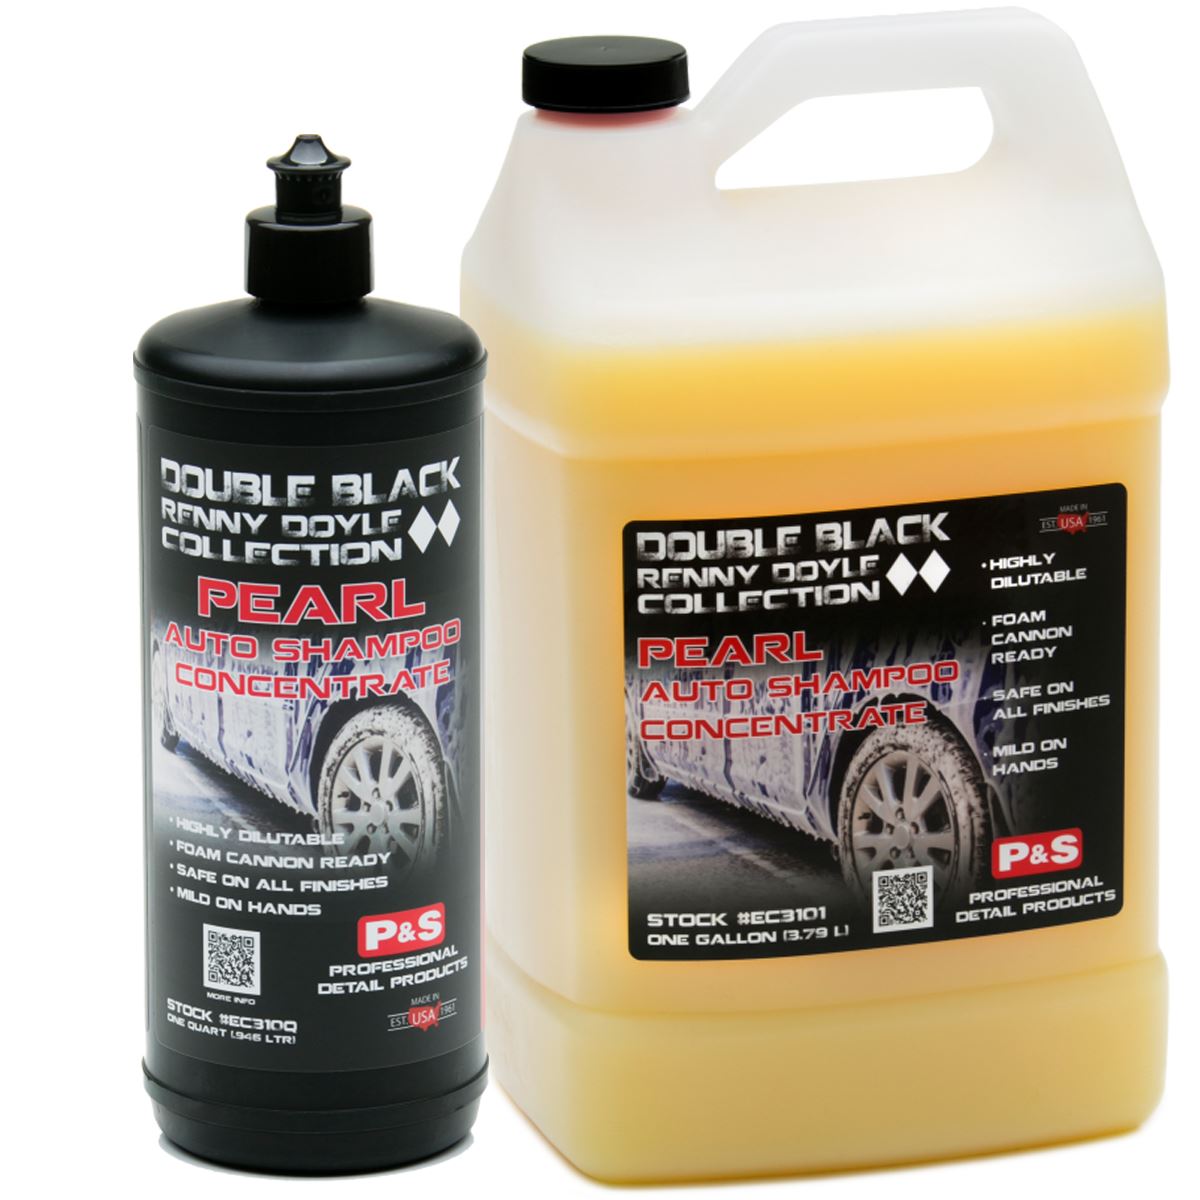 Pearl Auto Shampoo EC31. Professional Detailing Products, Because Your Car  is a Reflection of You